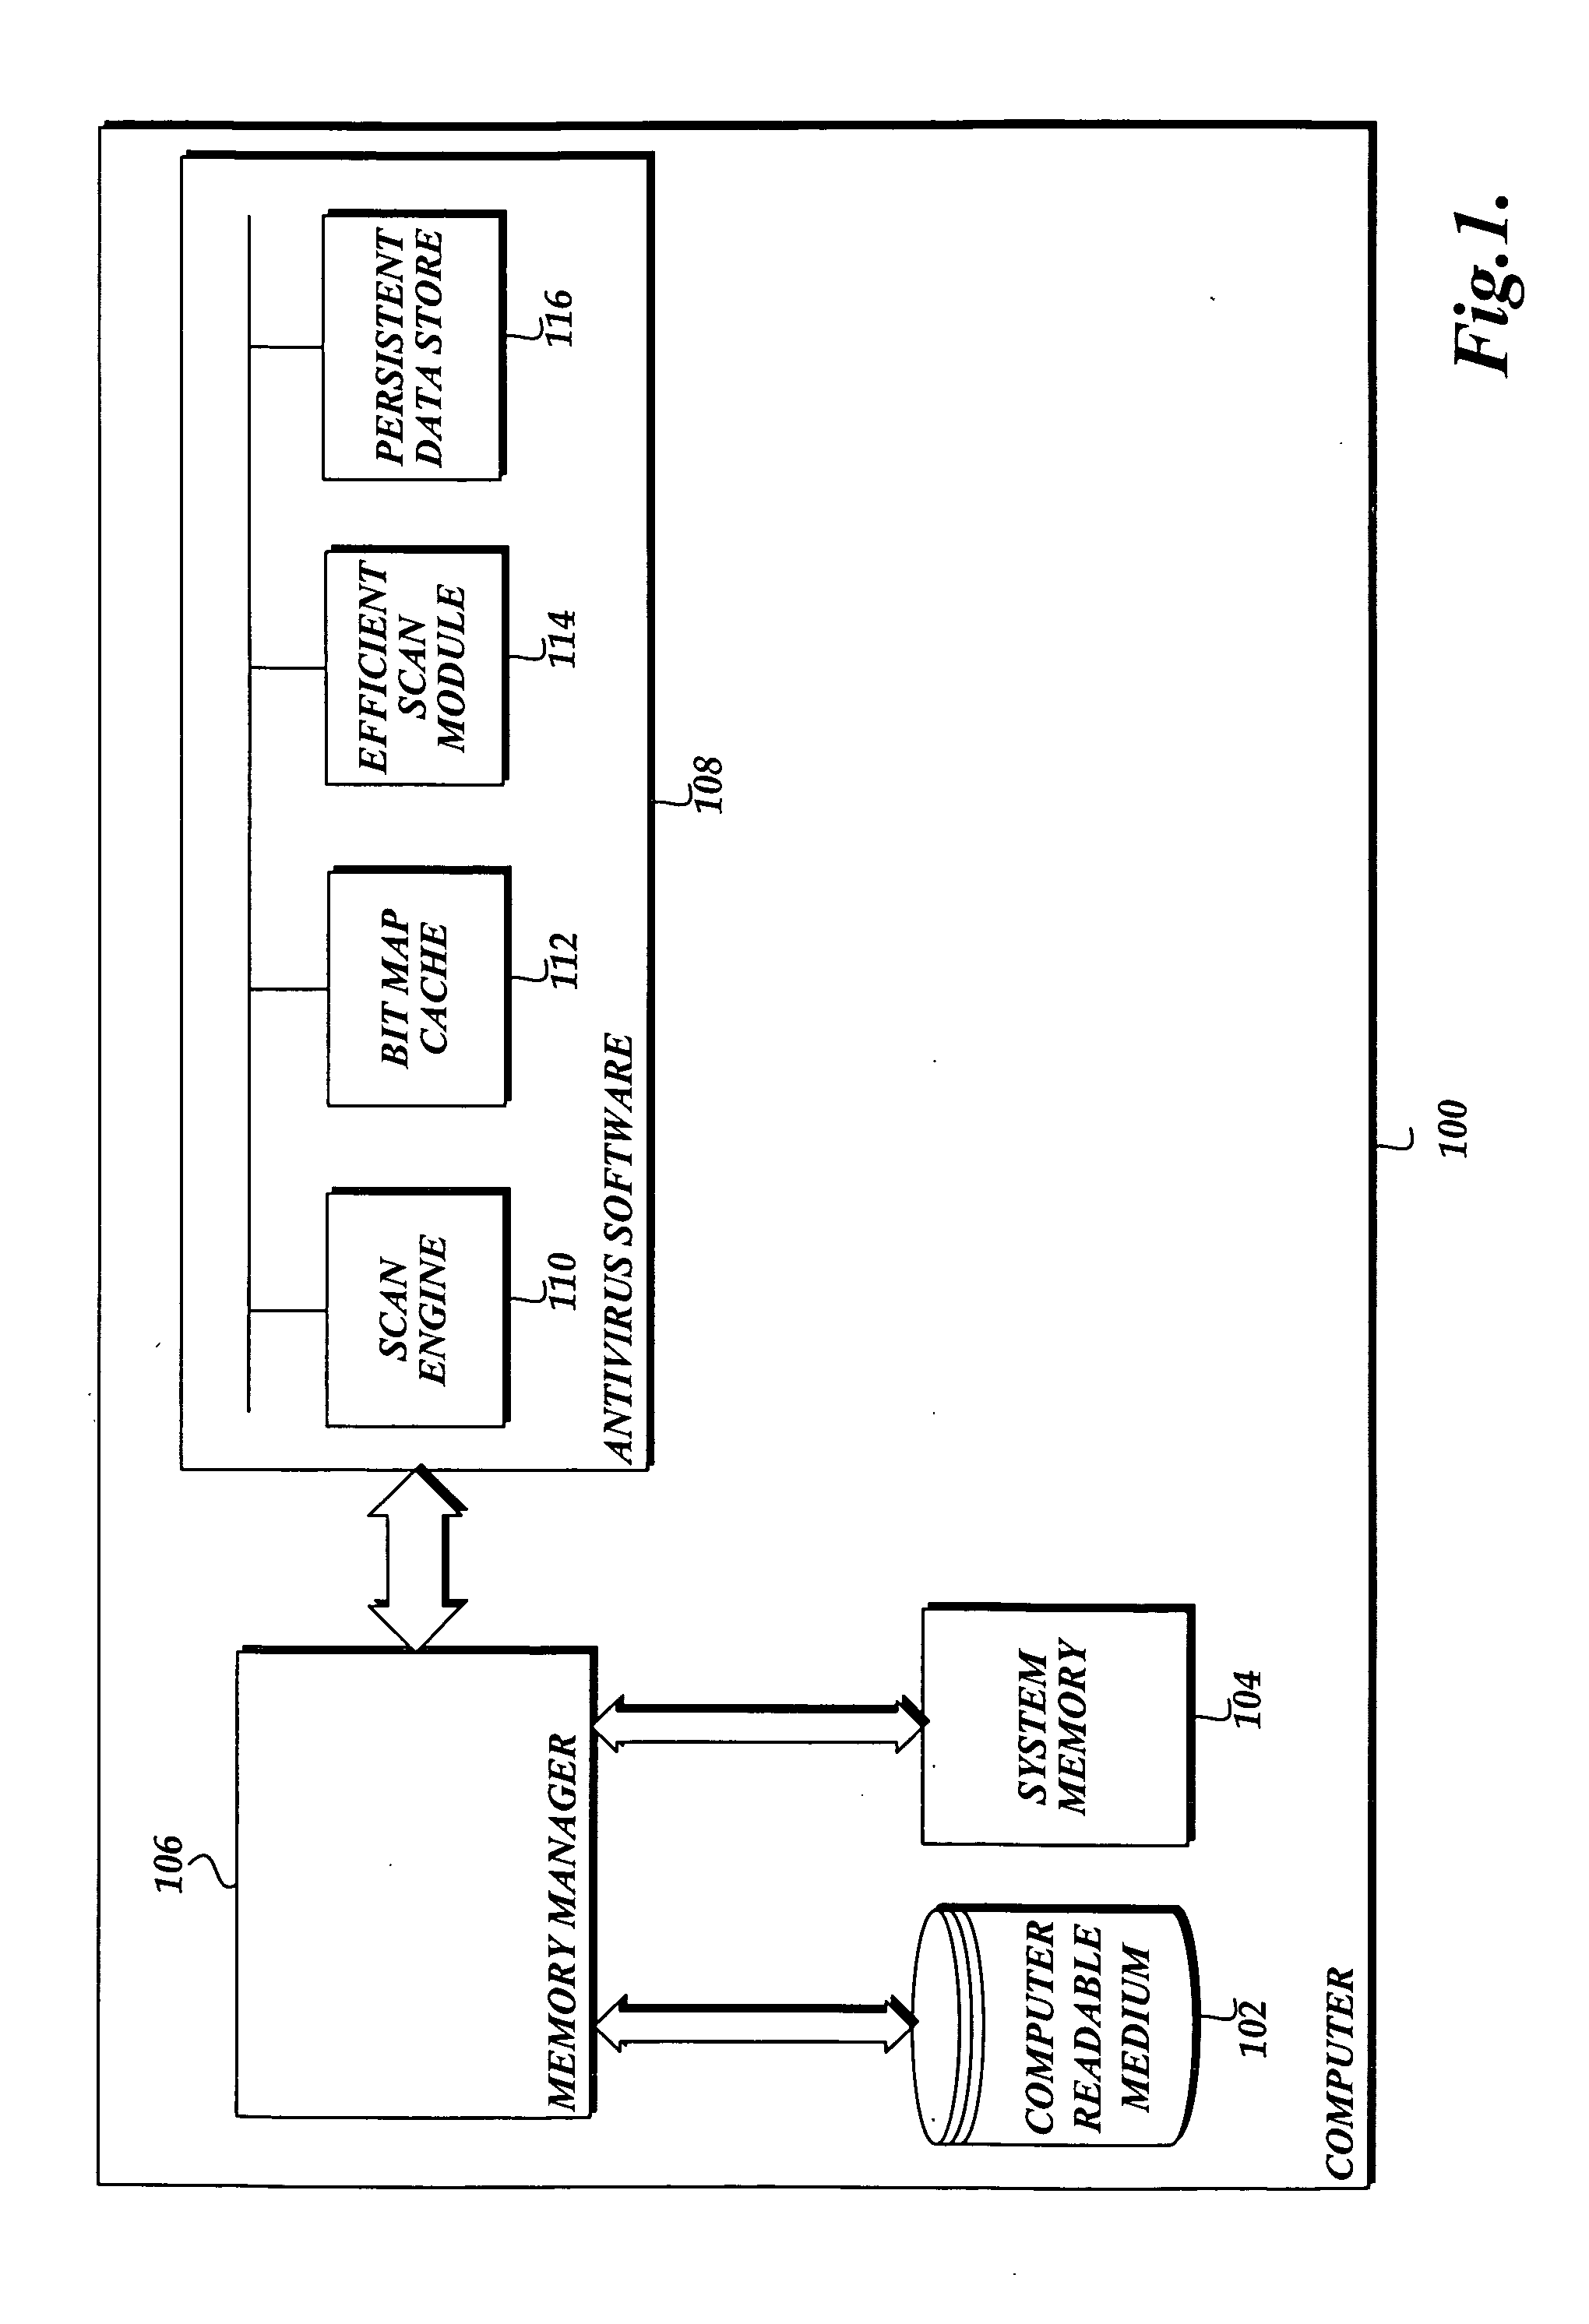 System and method for efficiently scanning a file for malware